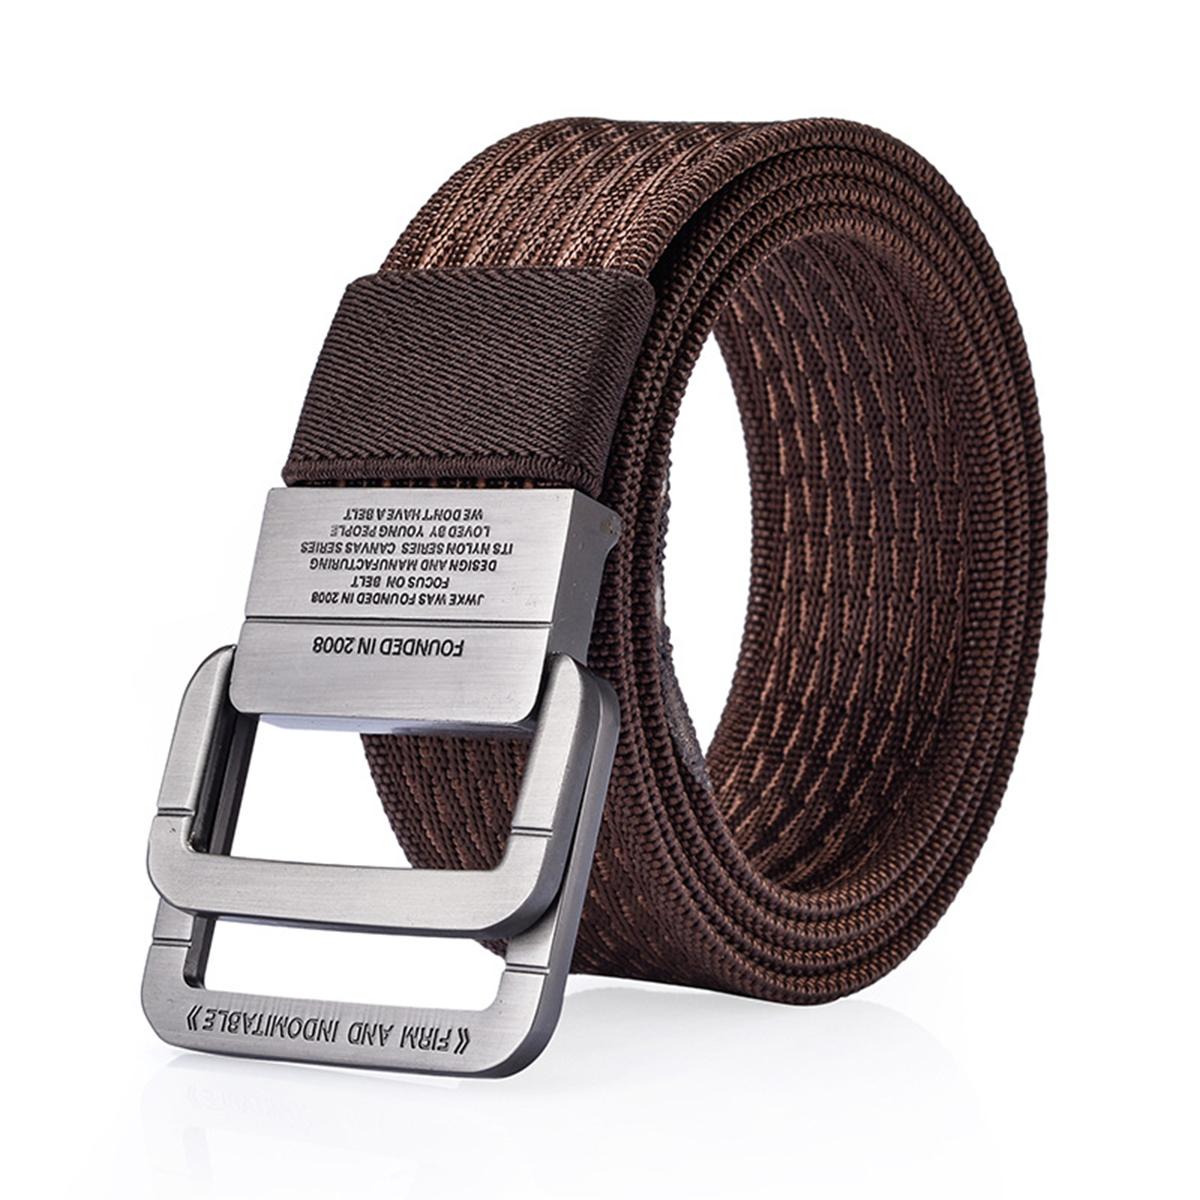 120cm Nylon Double Ring Alloy Buckle Belt Outdoor Sport Military Tactical Strip Coffee Coffee Coffee Buy Online At Best Prices In Pakistan Daraz Pk